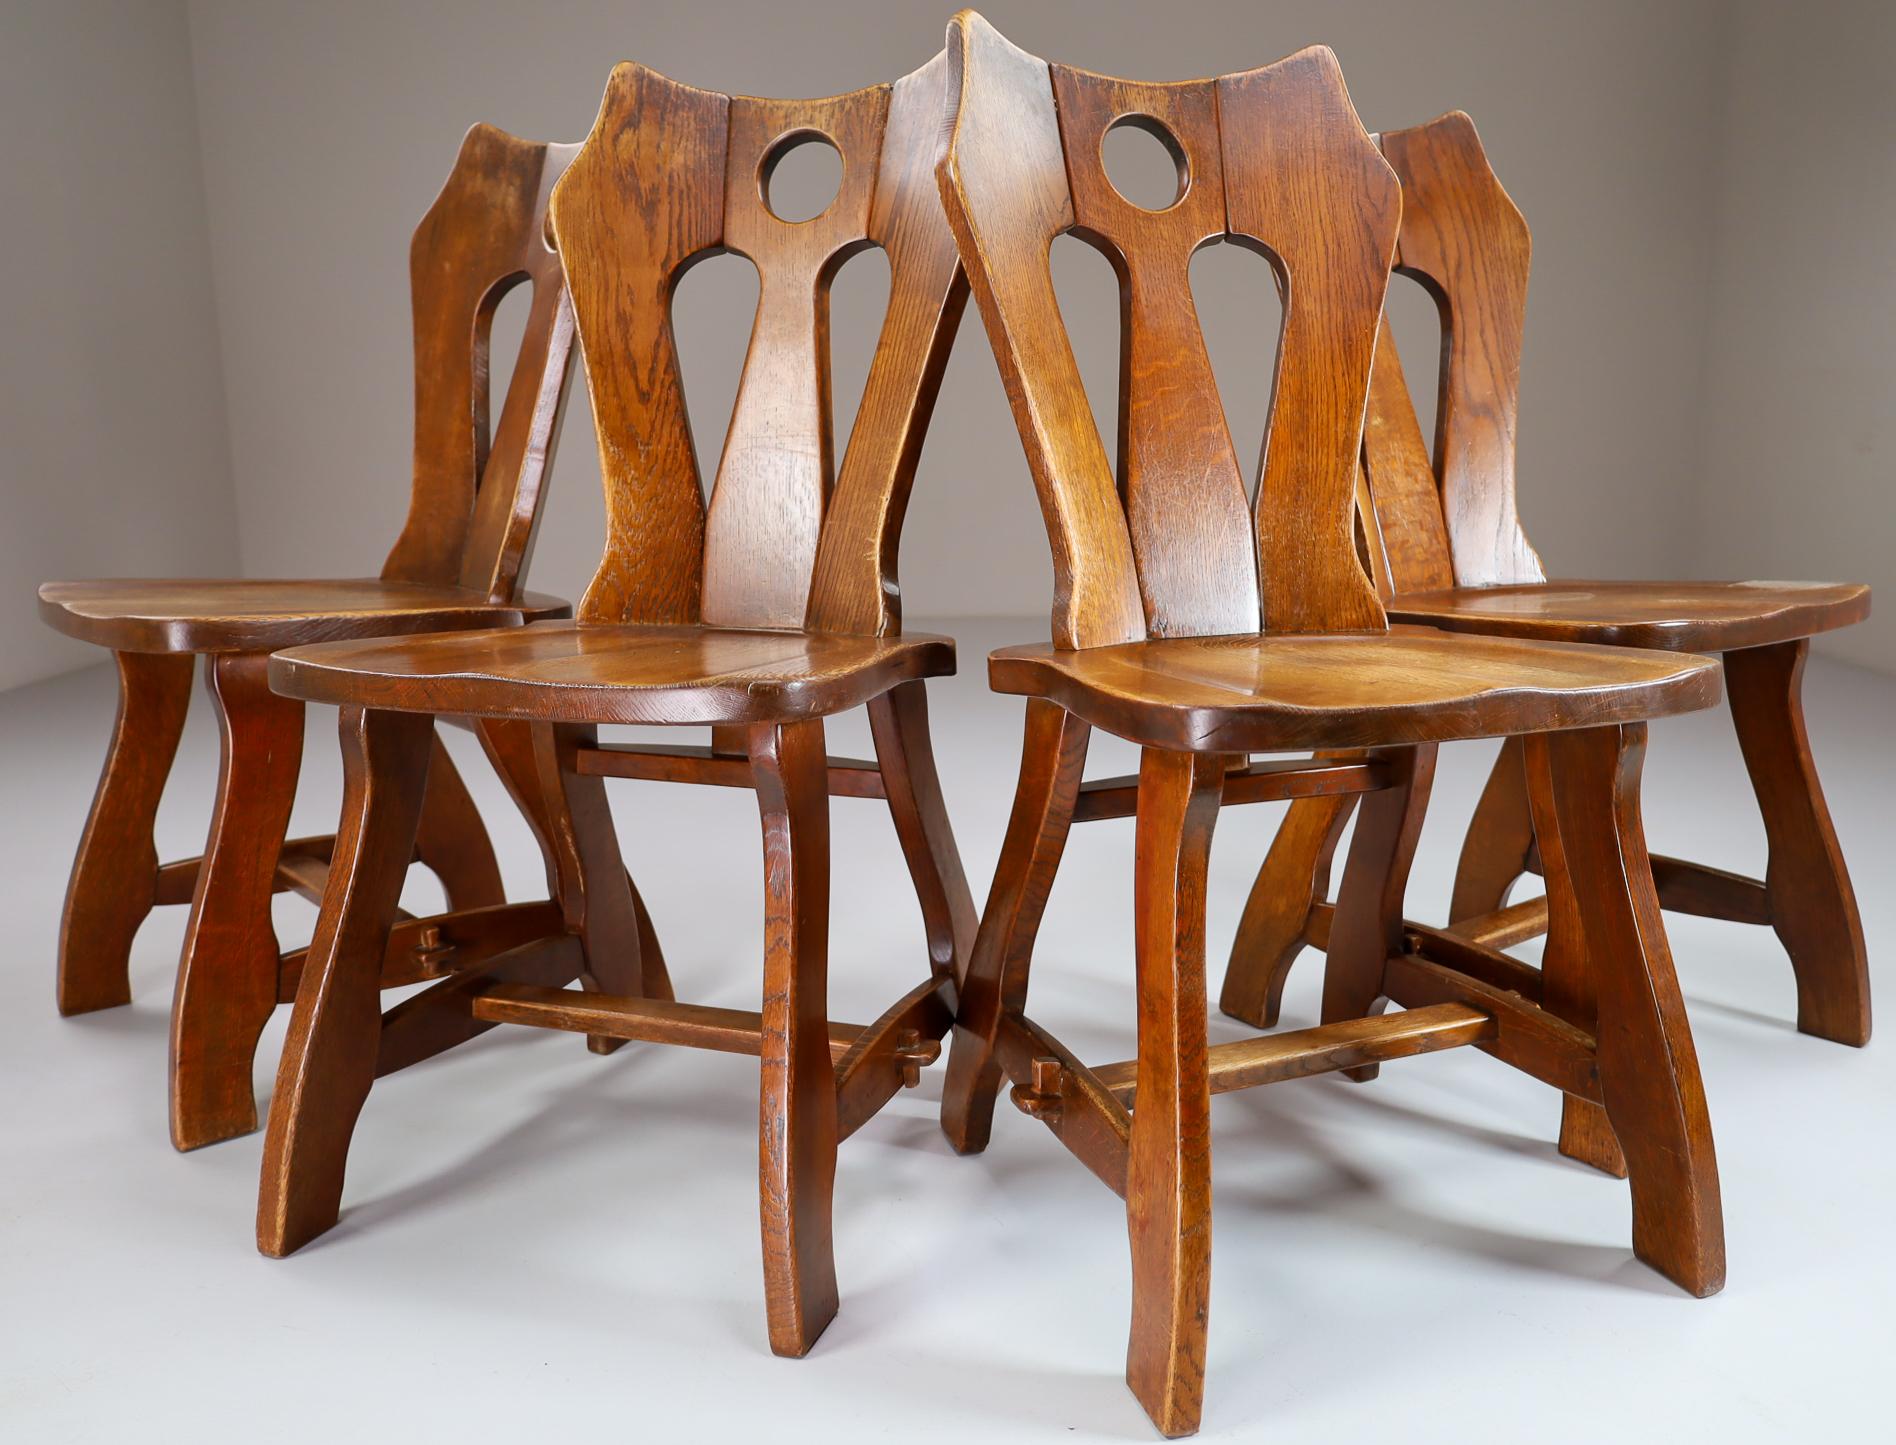 Set of four brutalist chairs in patinated oak, Belgium, 1960s.

A set of four wooden dining chairs. These chairs are made of oak and sculpturally crafted by hand. The craftsmanship is still visible, they are made of solid oak wood and constructed